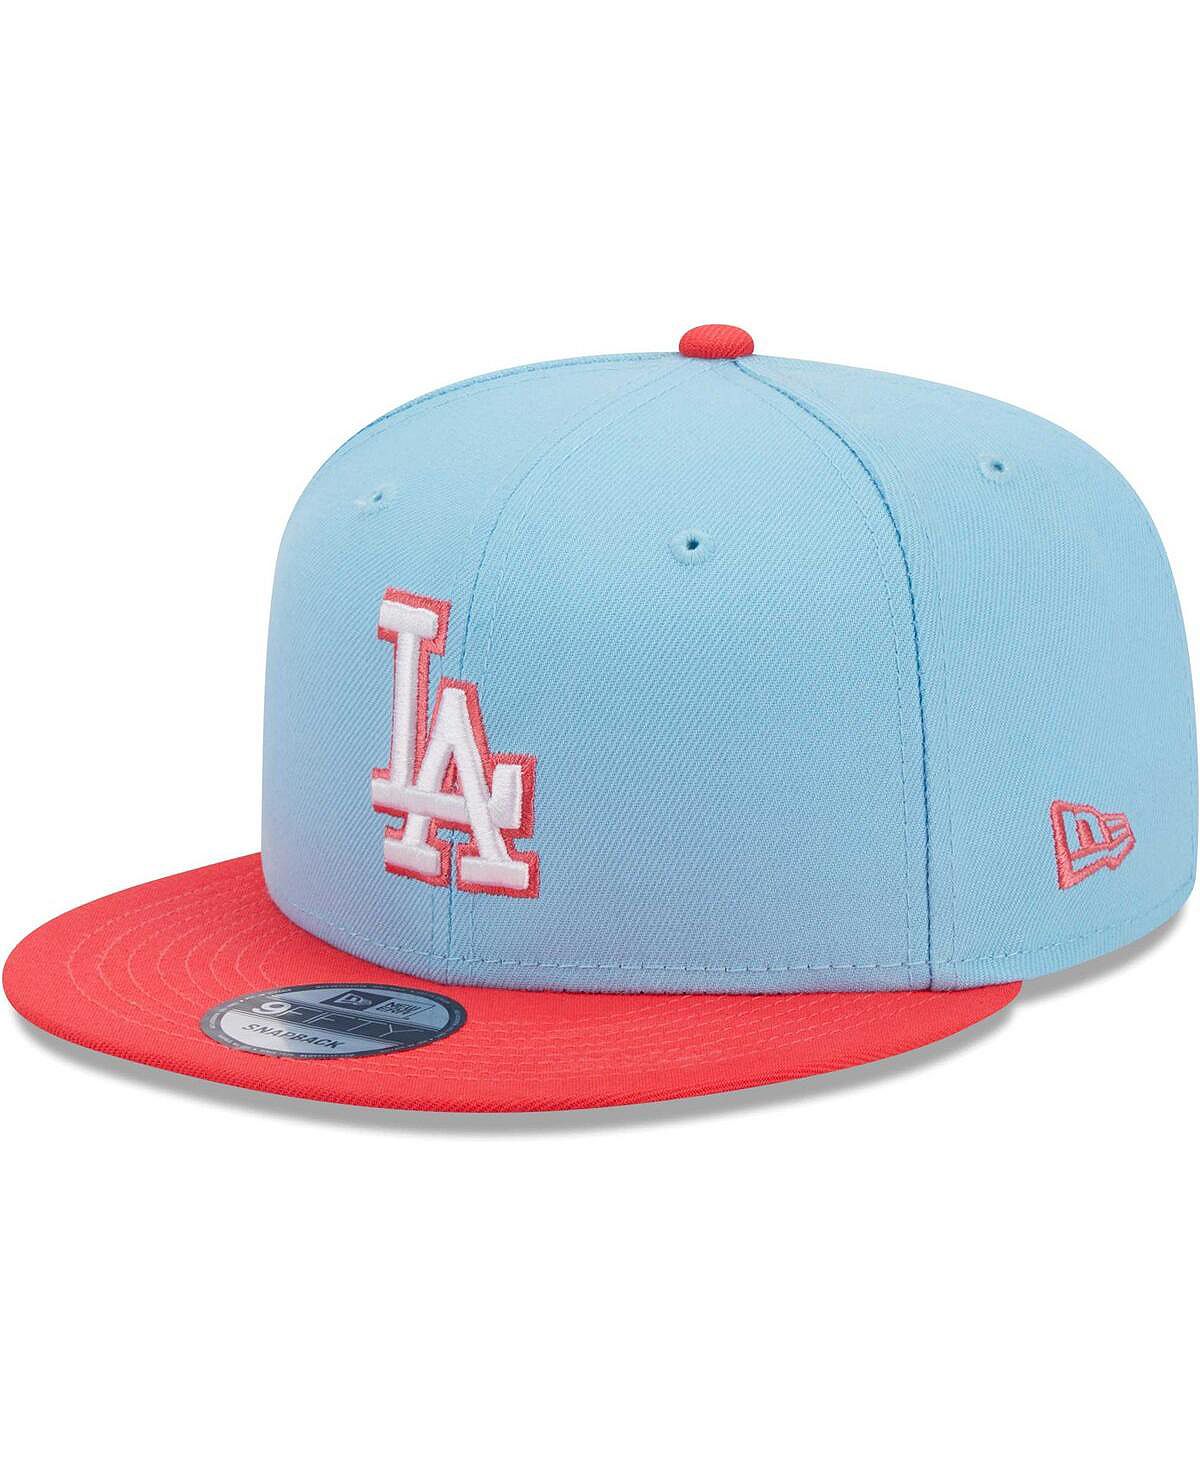 Мужская голубая и красная кепка Los Angeles Dodgers Spring Basic двухцветная кепка Snapback 9FIFTY New Era auto accessories 63 65mm inlet carbon fiber color car exhaust muffler pipe tip with red blue led light red blue light